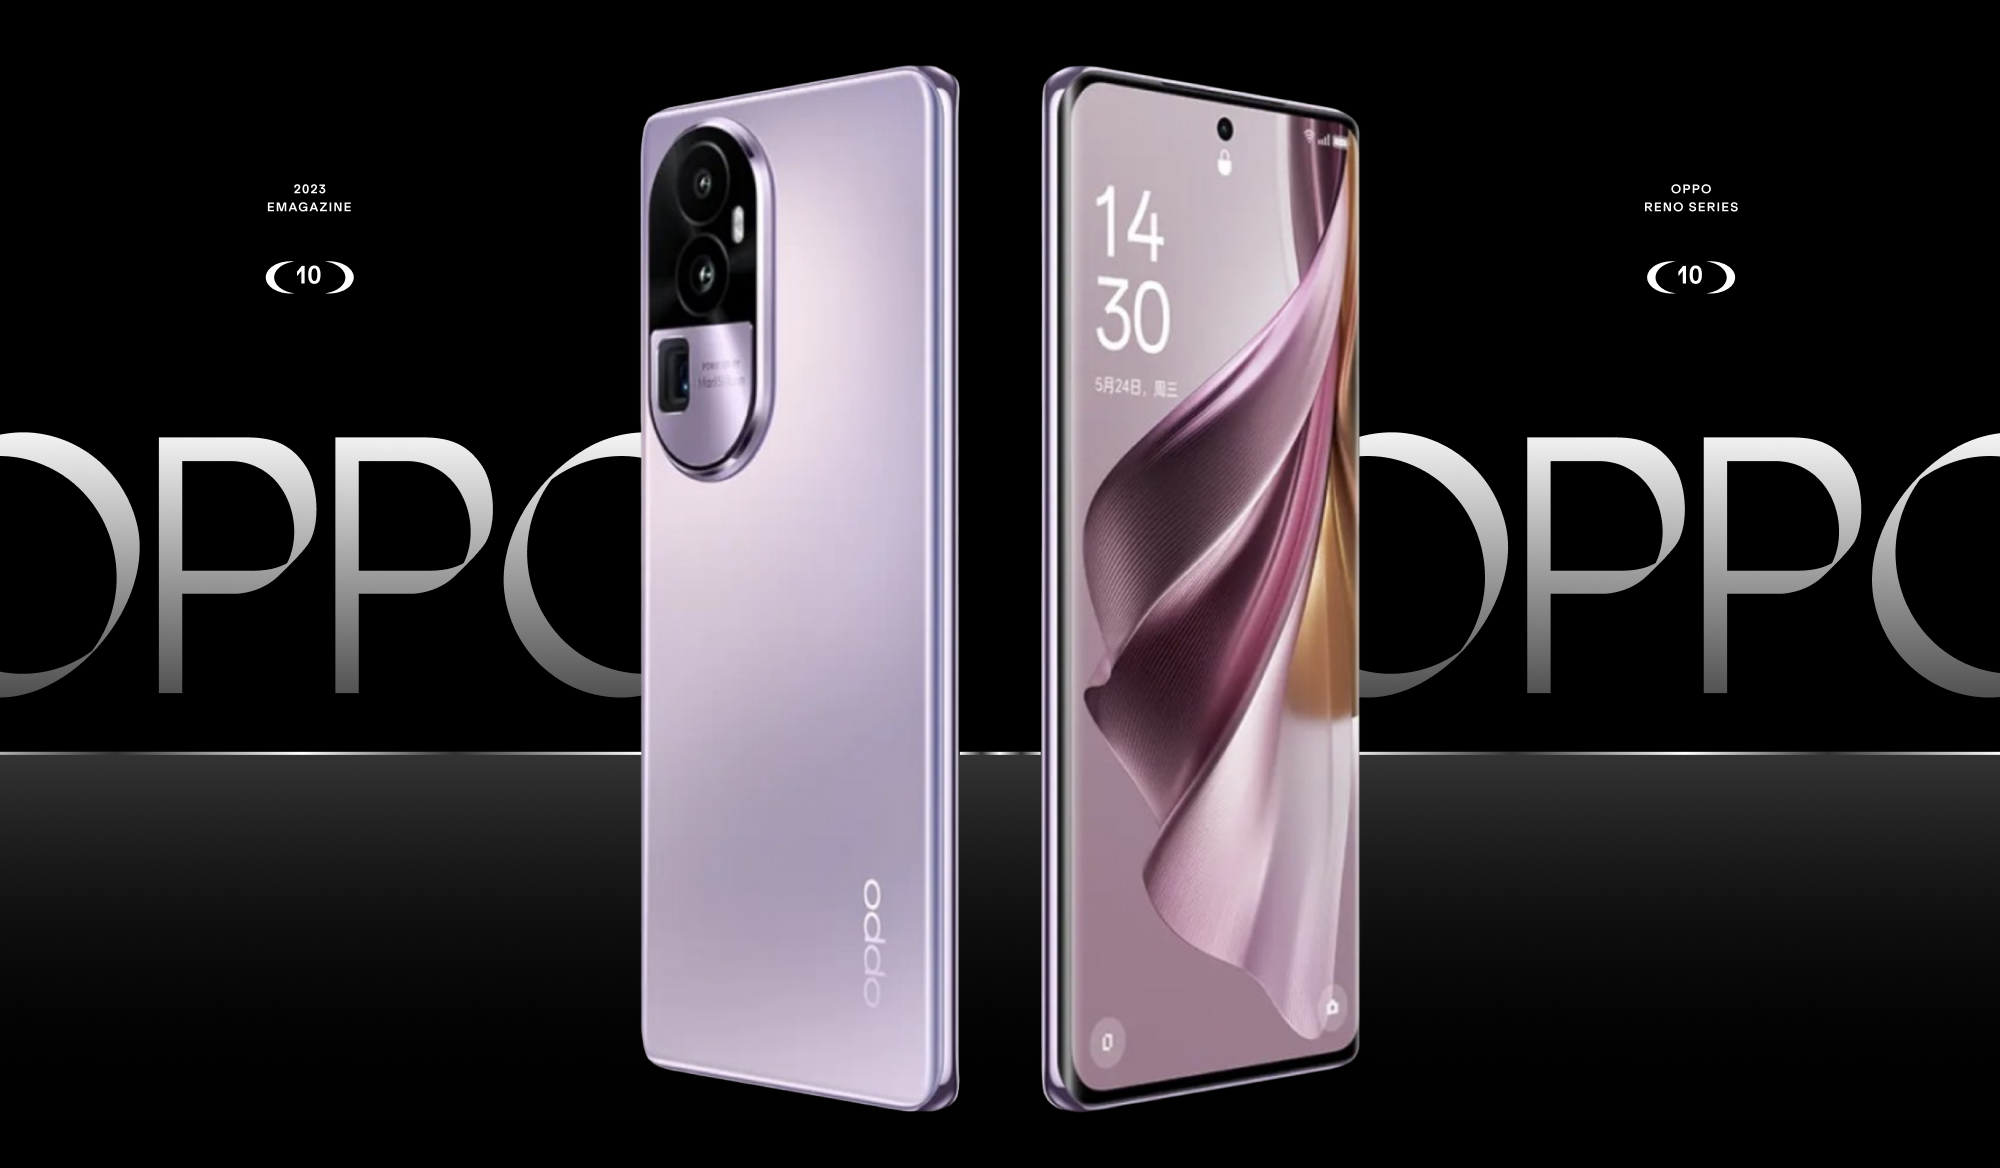 4 years and 10 years of OPPO Reno: looking at the ultra-fast development of smartphones with young people - Photo 19.